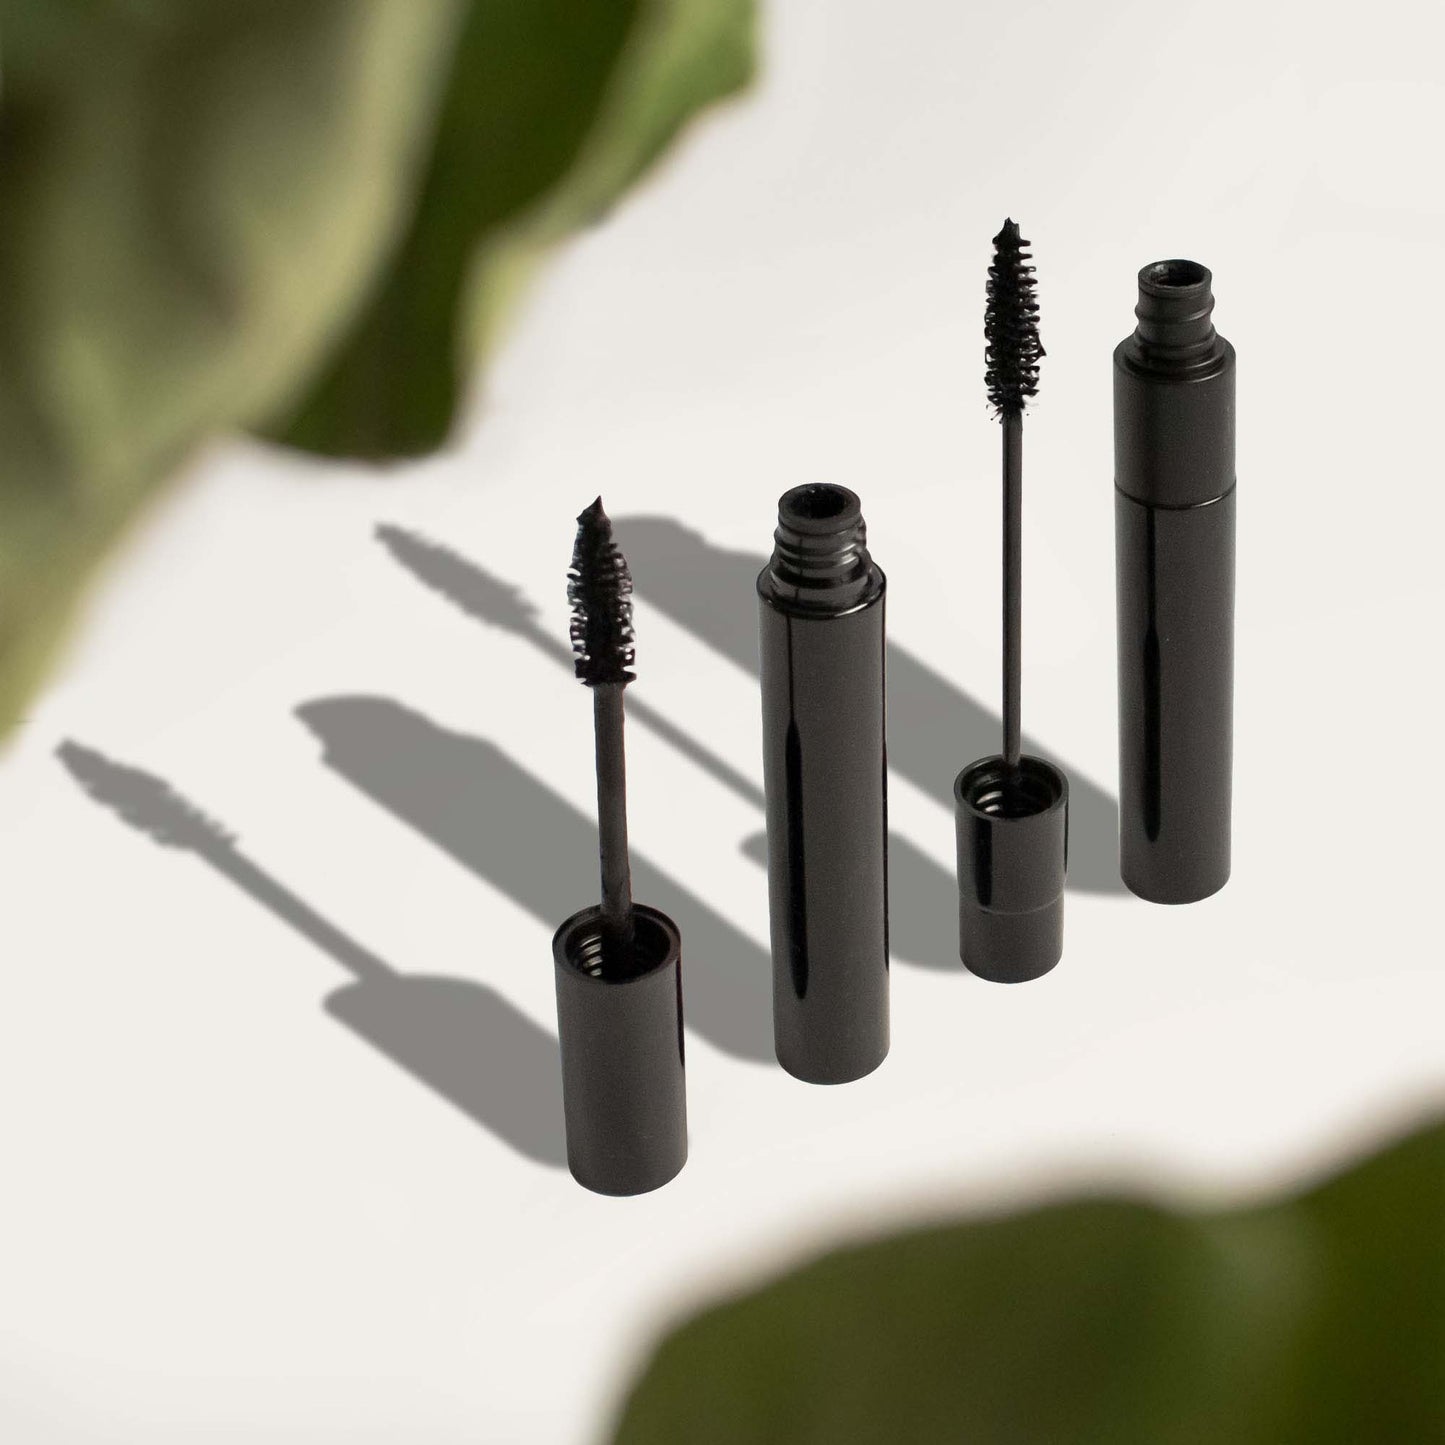 Achieve maximum lash volume and definition with our newly  Cruisin Organics reformulated Dual Lash Mascara in Black. Choose between full-volume or natural, wispy lashes with our dual-ended wand. No smudging or flaking guaranteed.